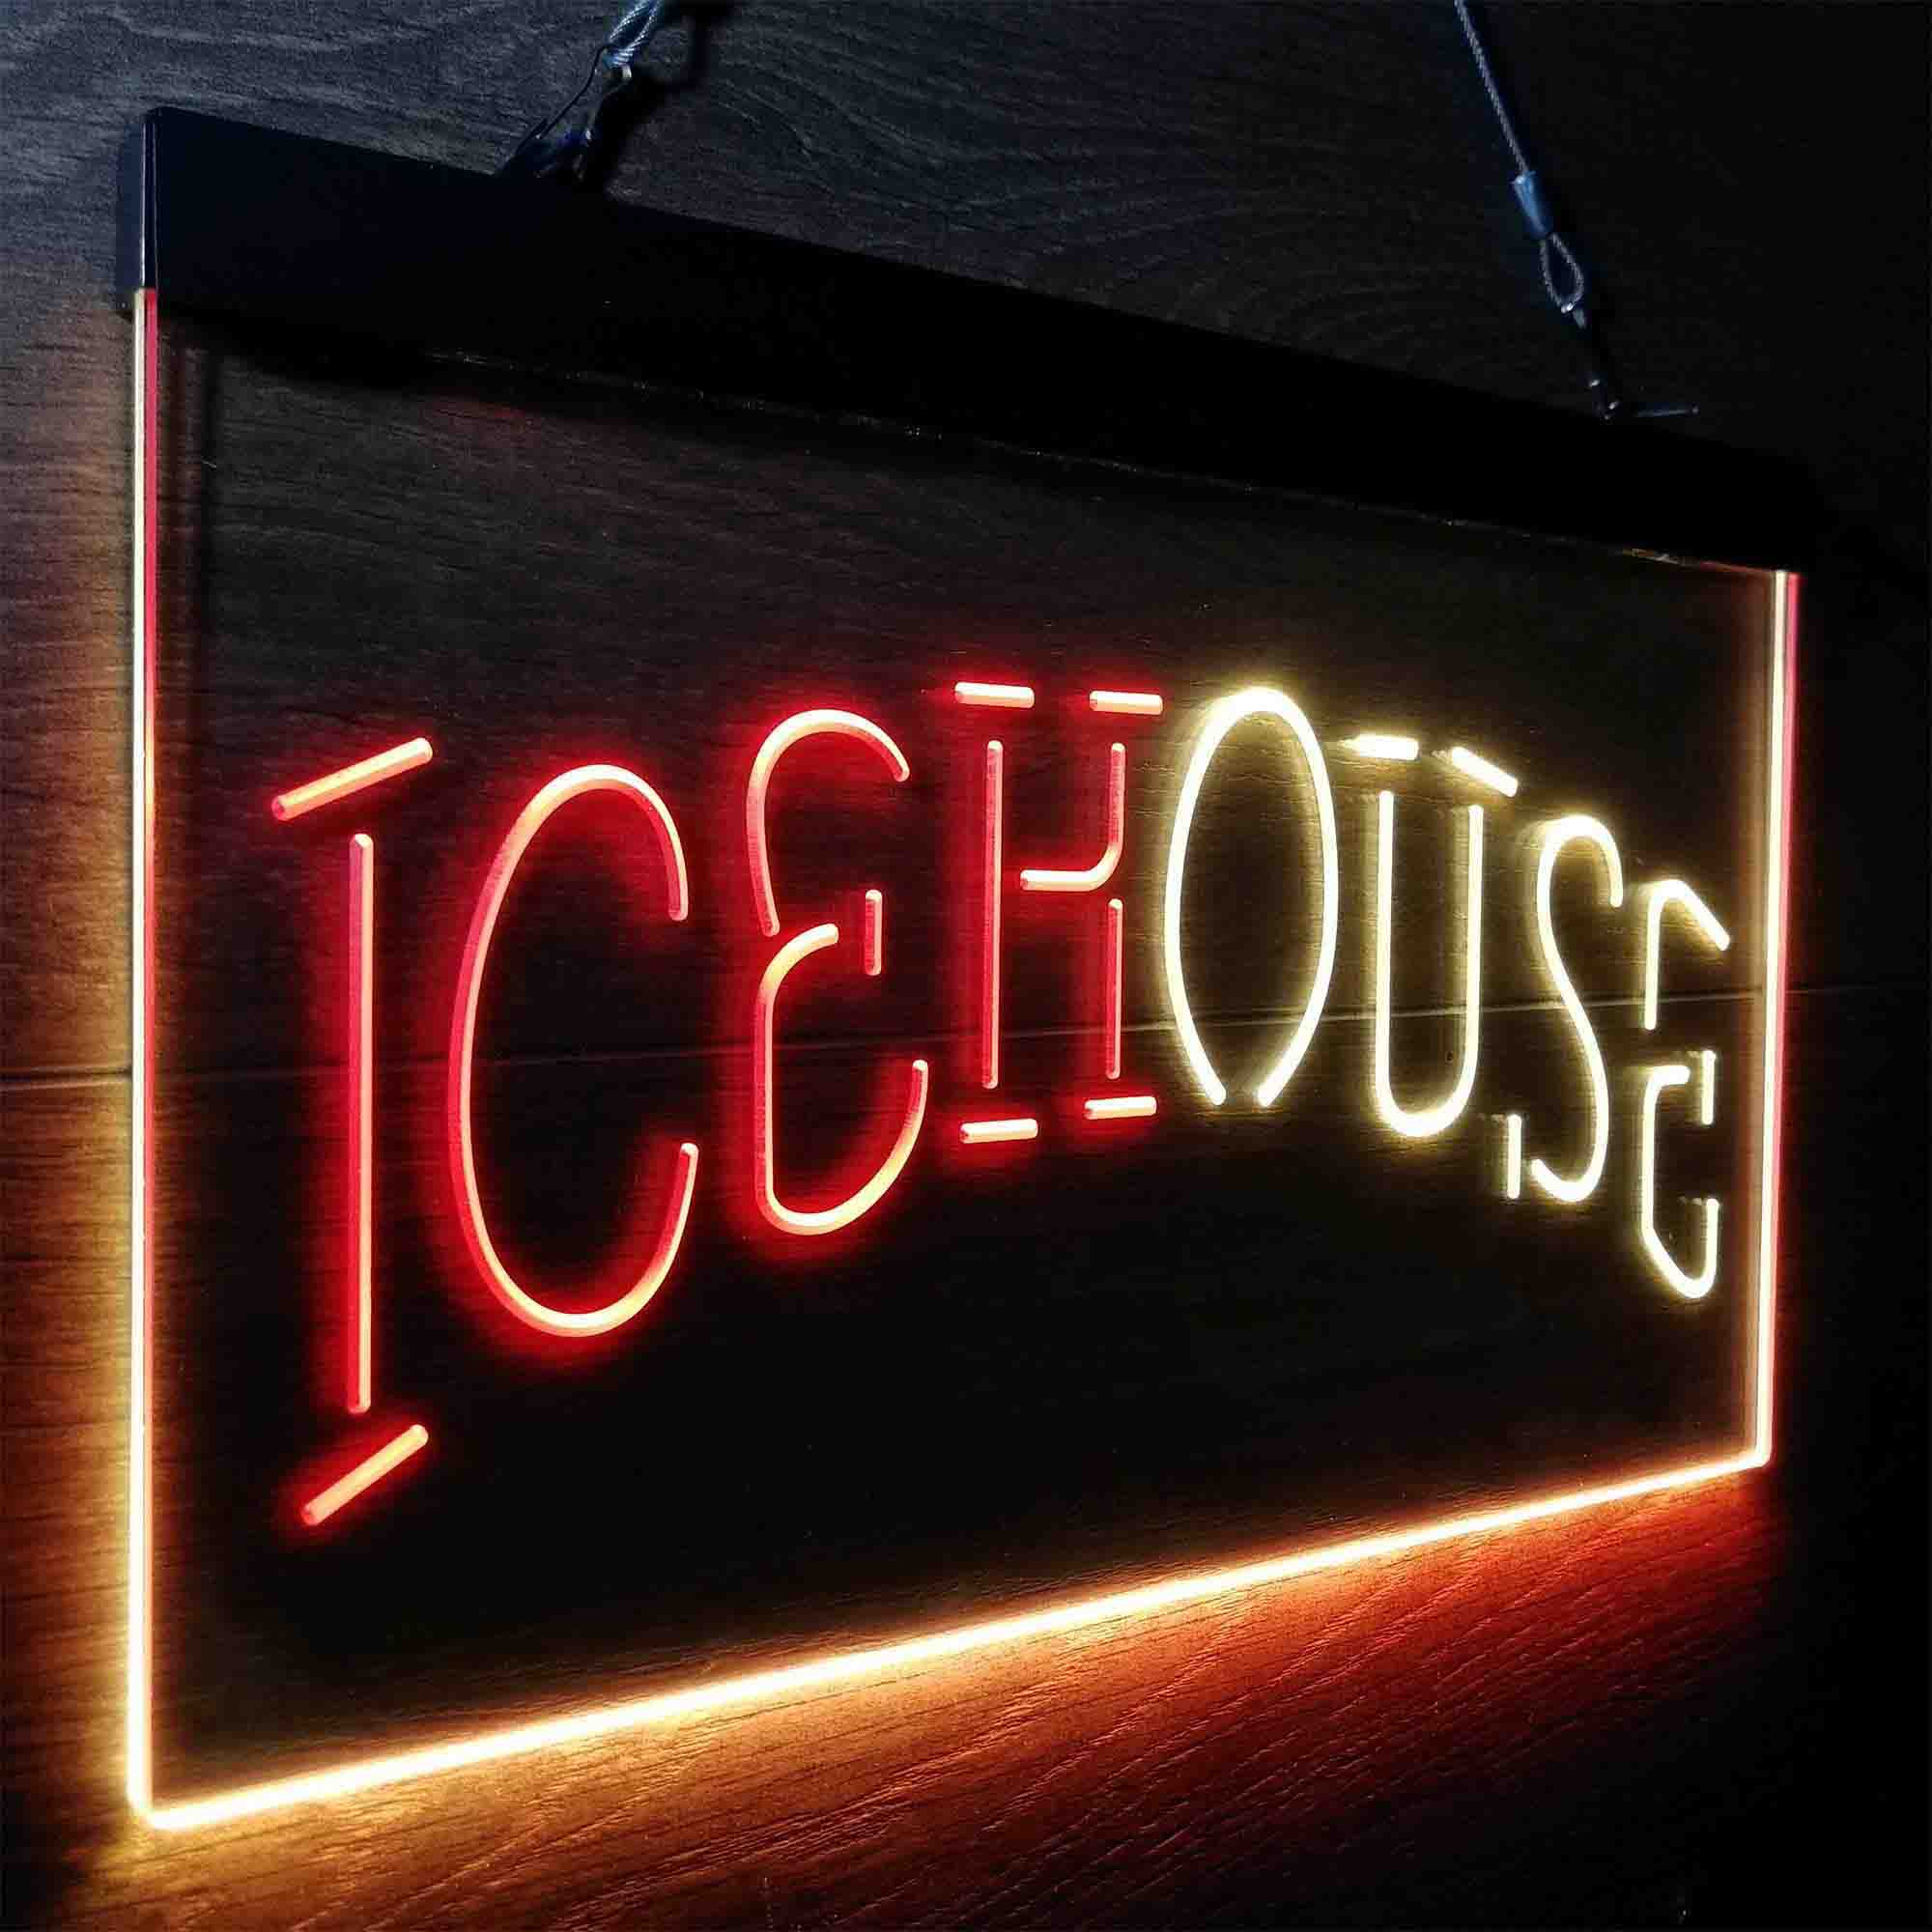 Icehouse Beer Neon-Like LED Sign